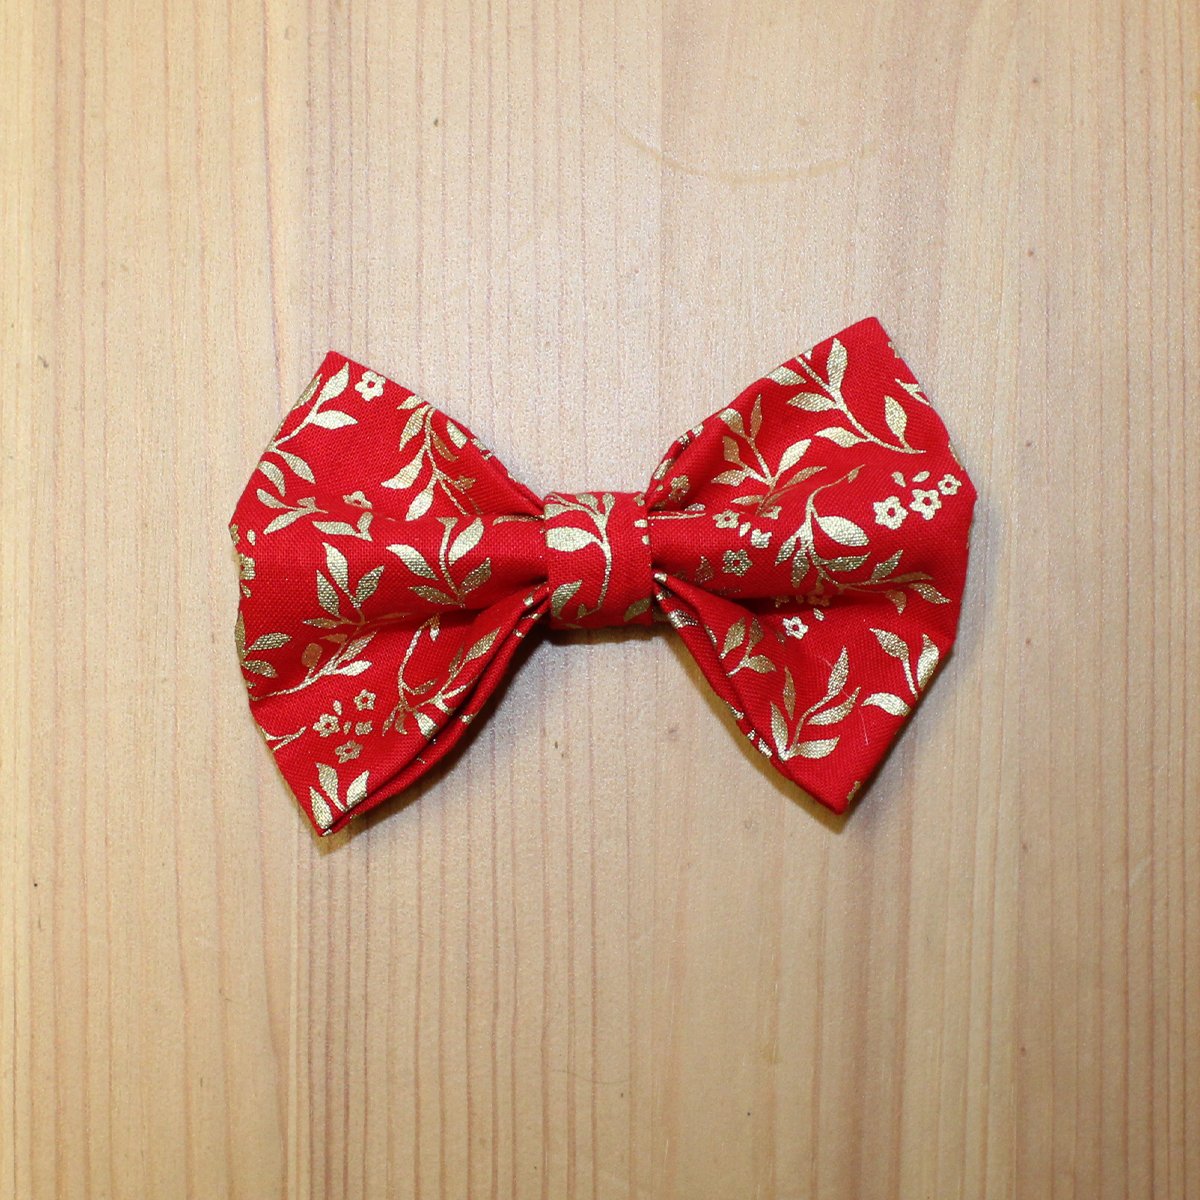 Image of Festive bow tie